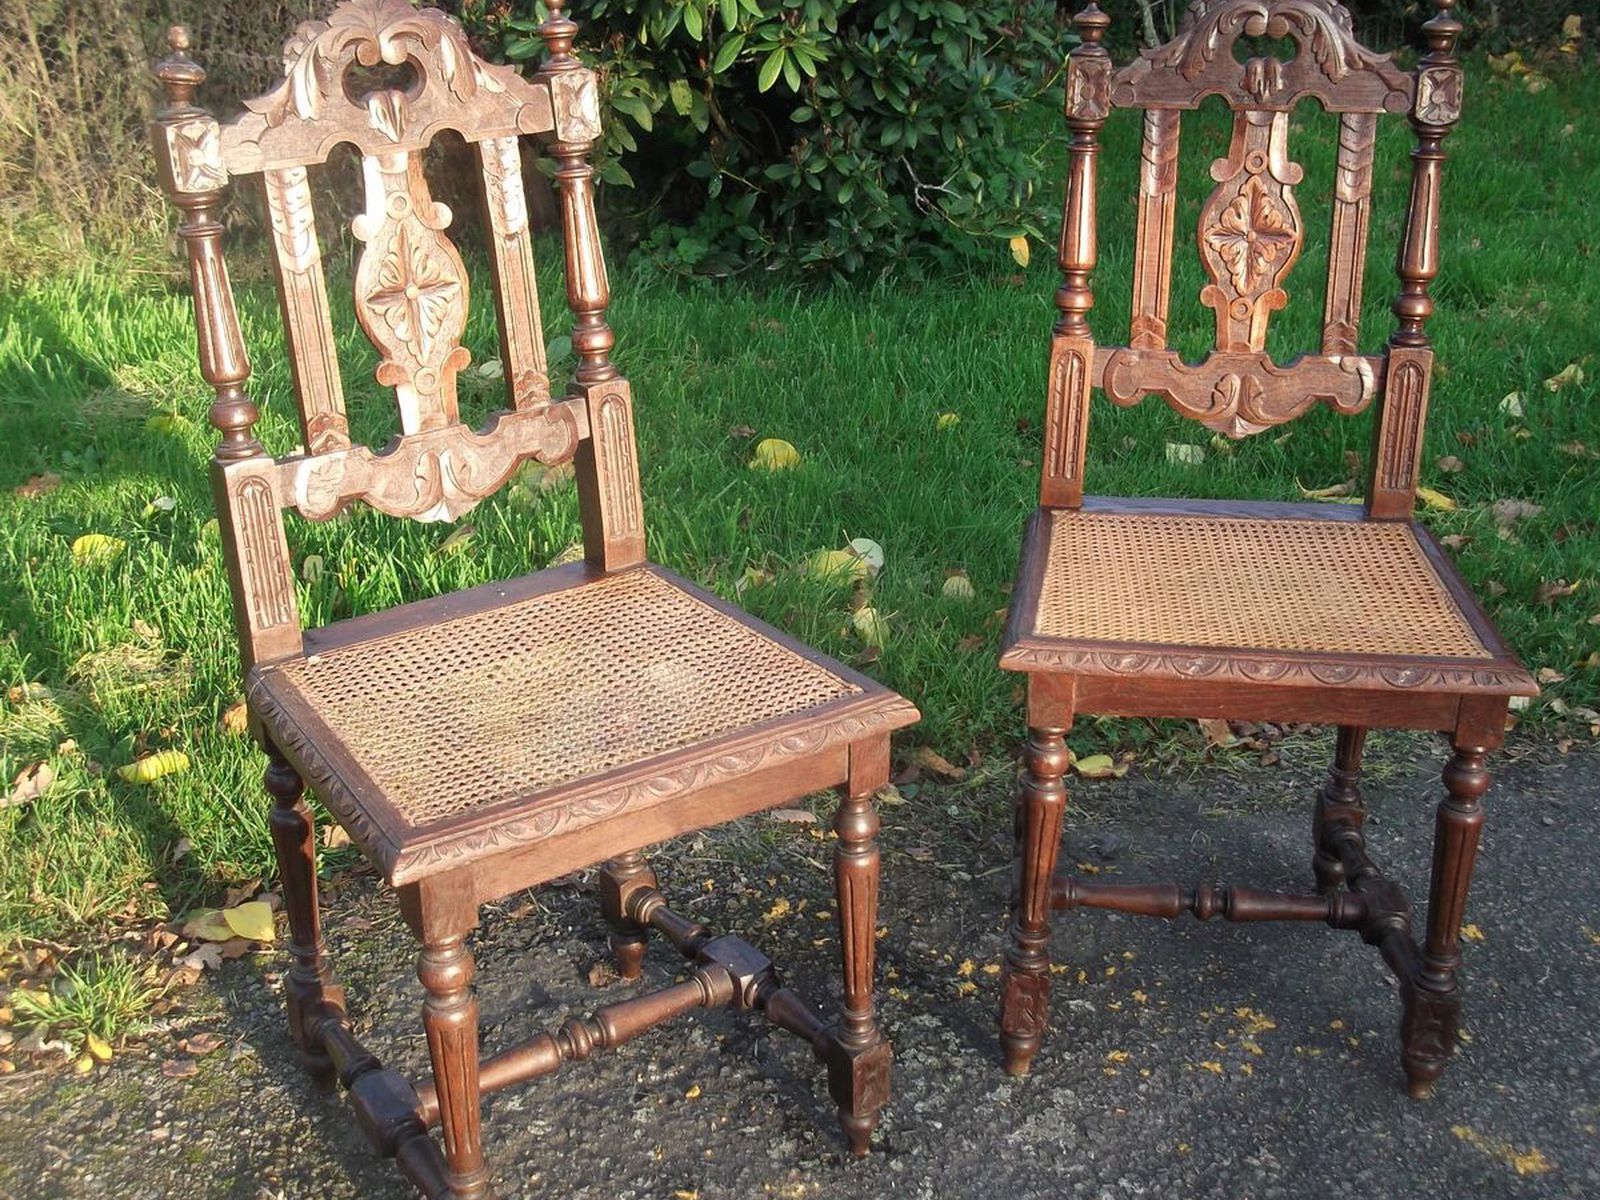 2 dining chair "Henry II" style